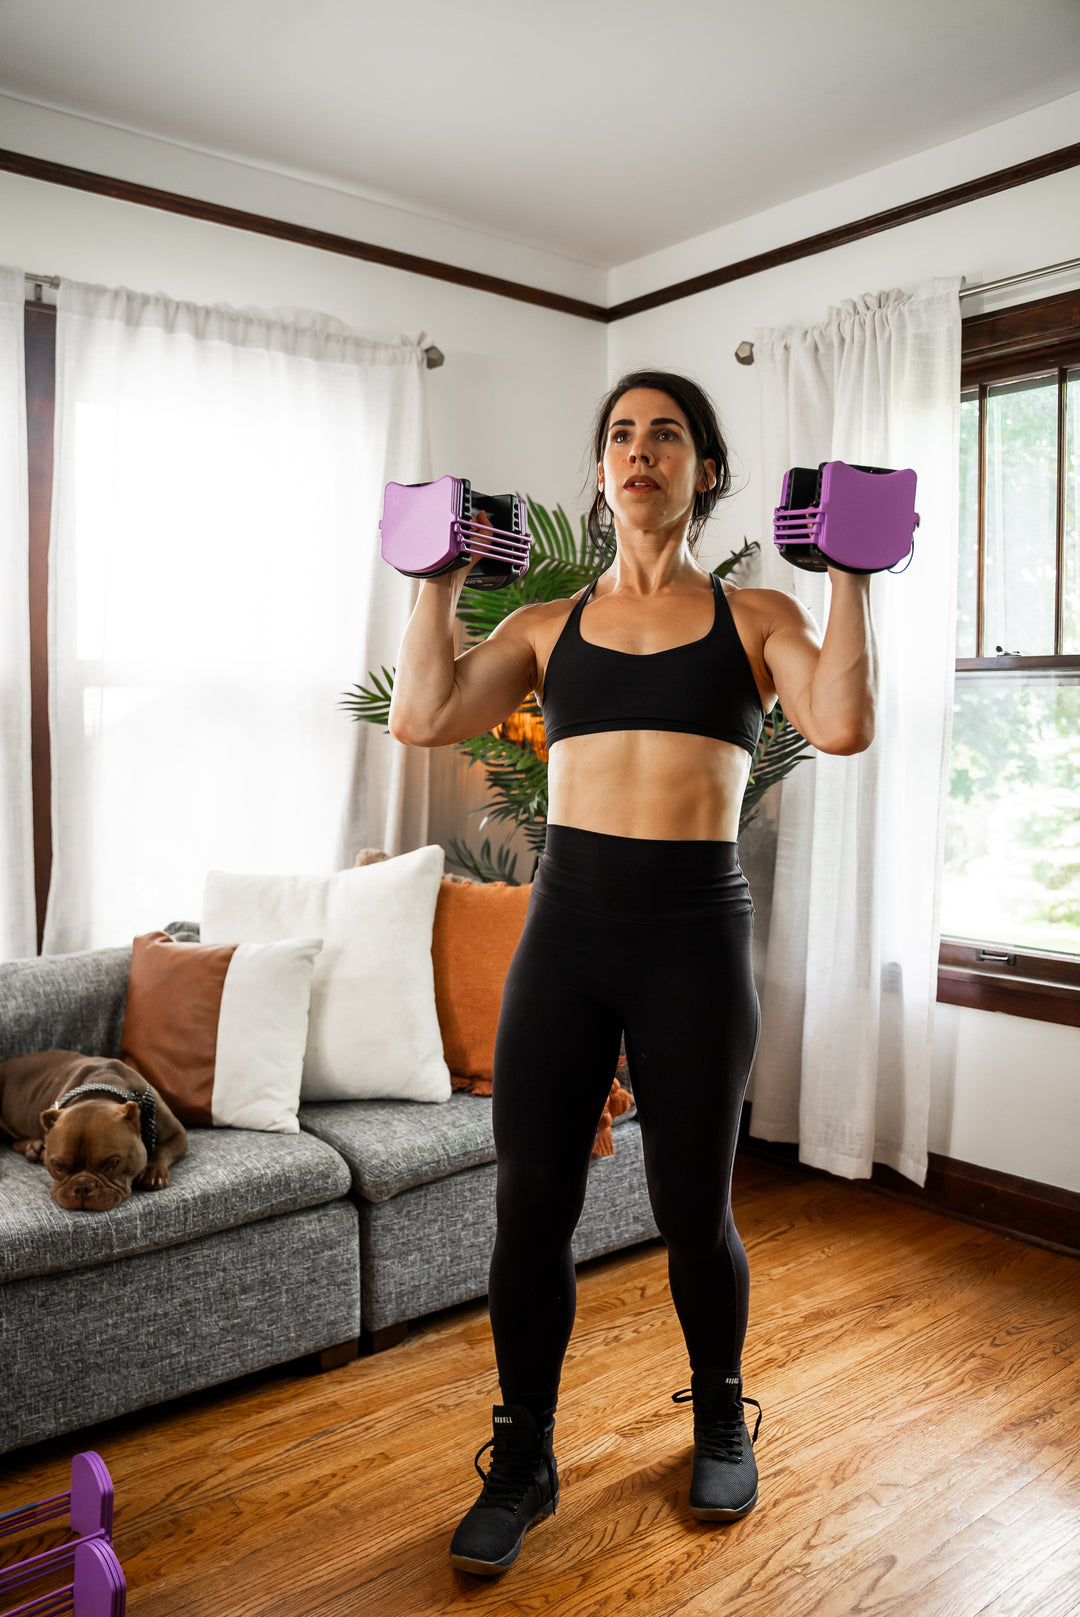 A woman in her home using two PowerBlock lavender Sport 24 Adjustable Dumbbells for shoulder presses.